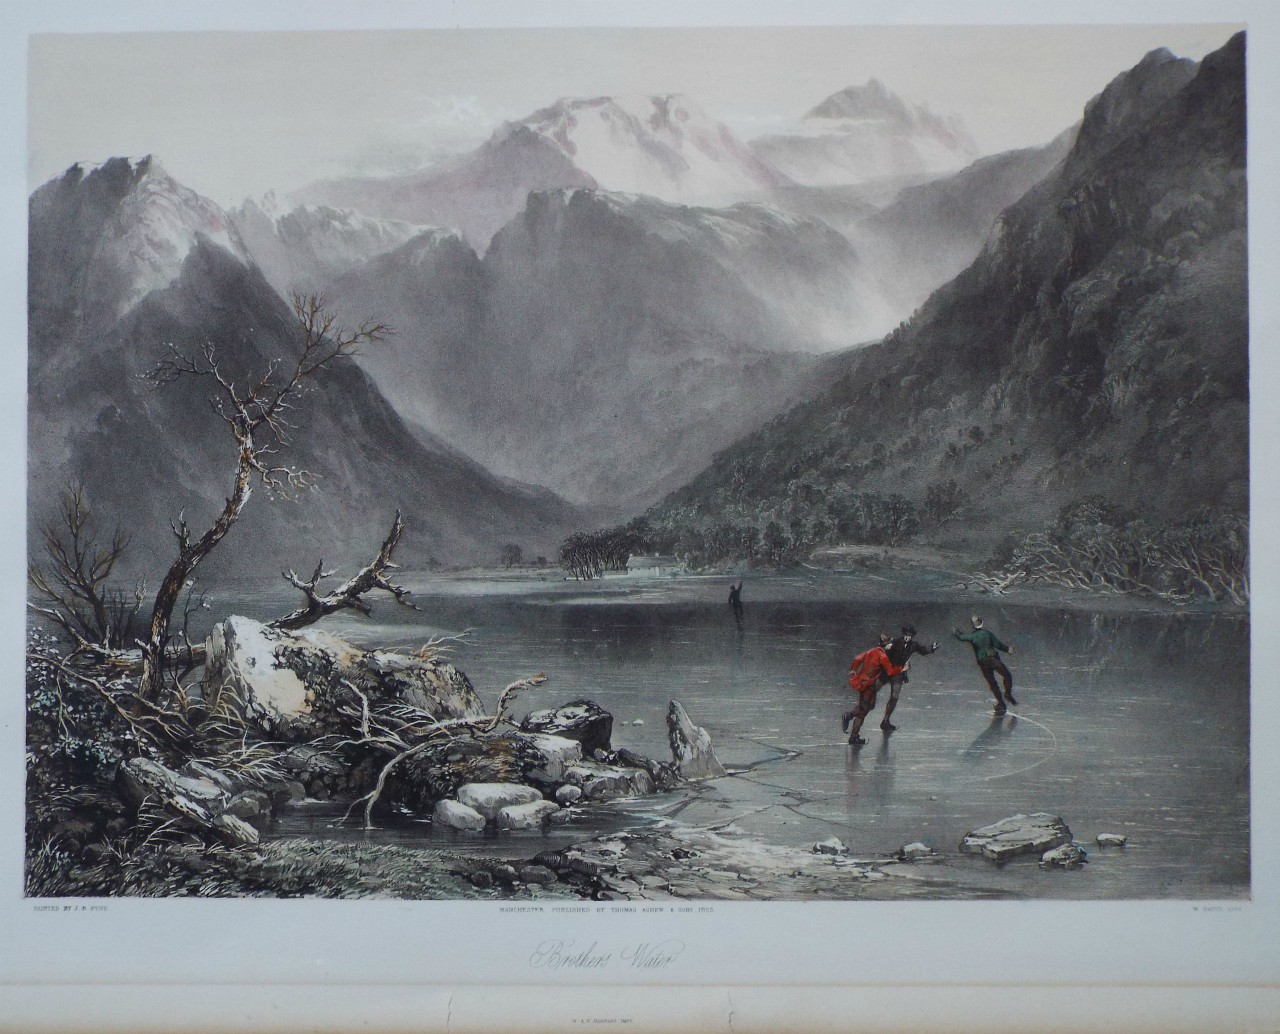 Lithograph - Brothers Water - Gauci